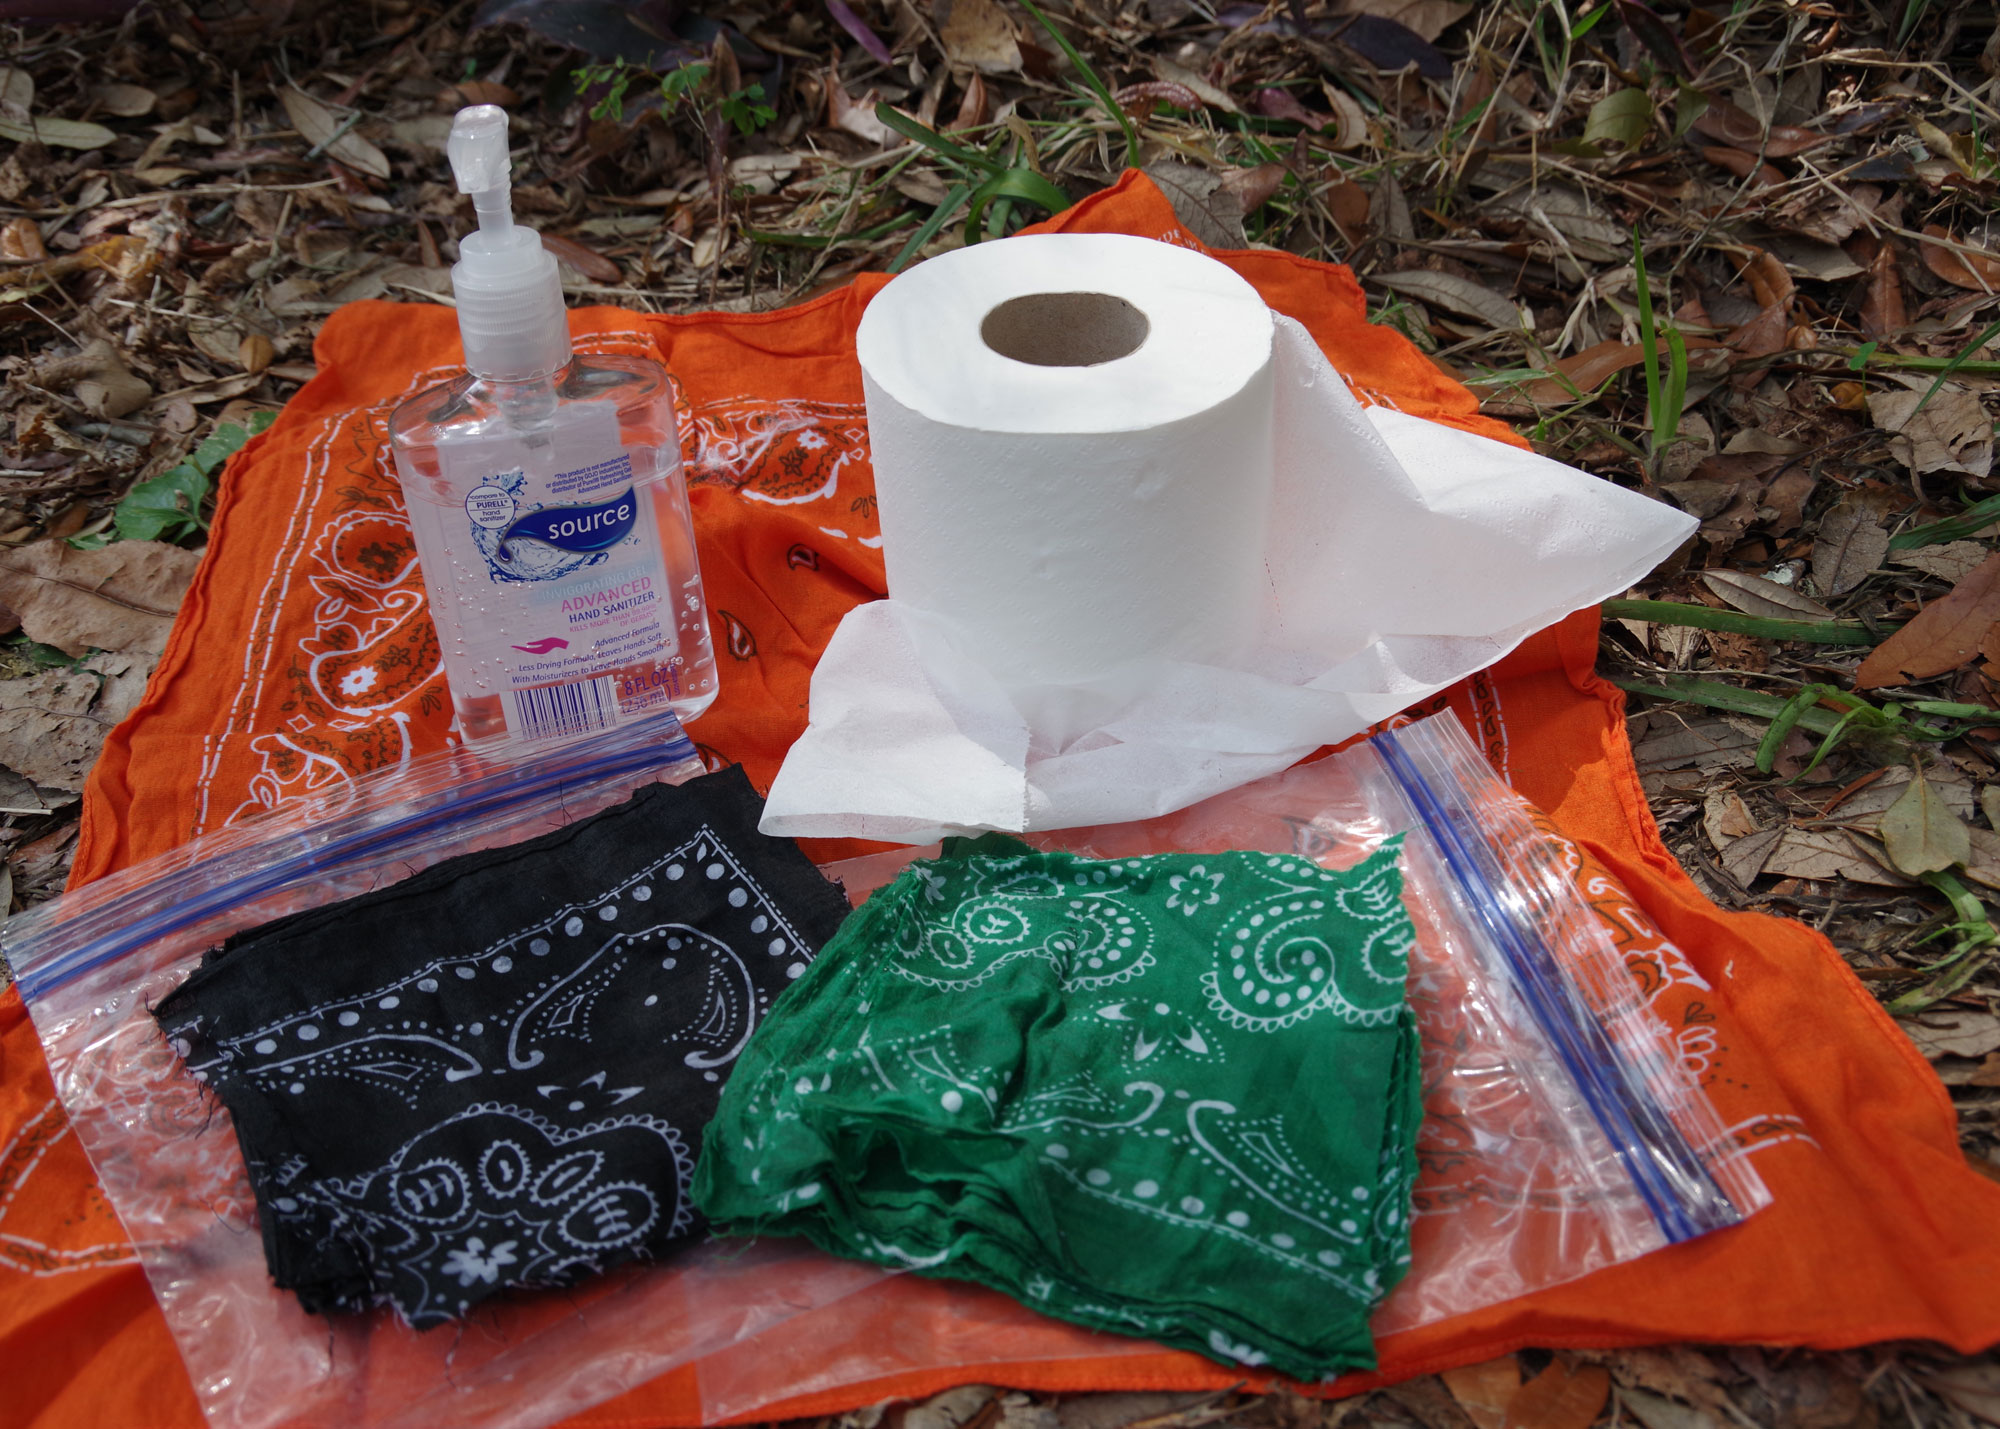 A bandana, biodegradable toilet paper, reusable bathroom wipes, and hand sanitizer will keep you clean and healthy on the trail.  | Credit: Karen Miller